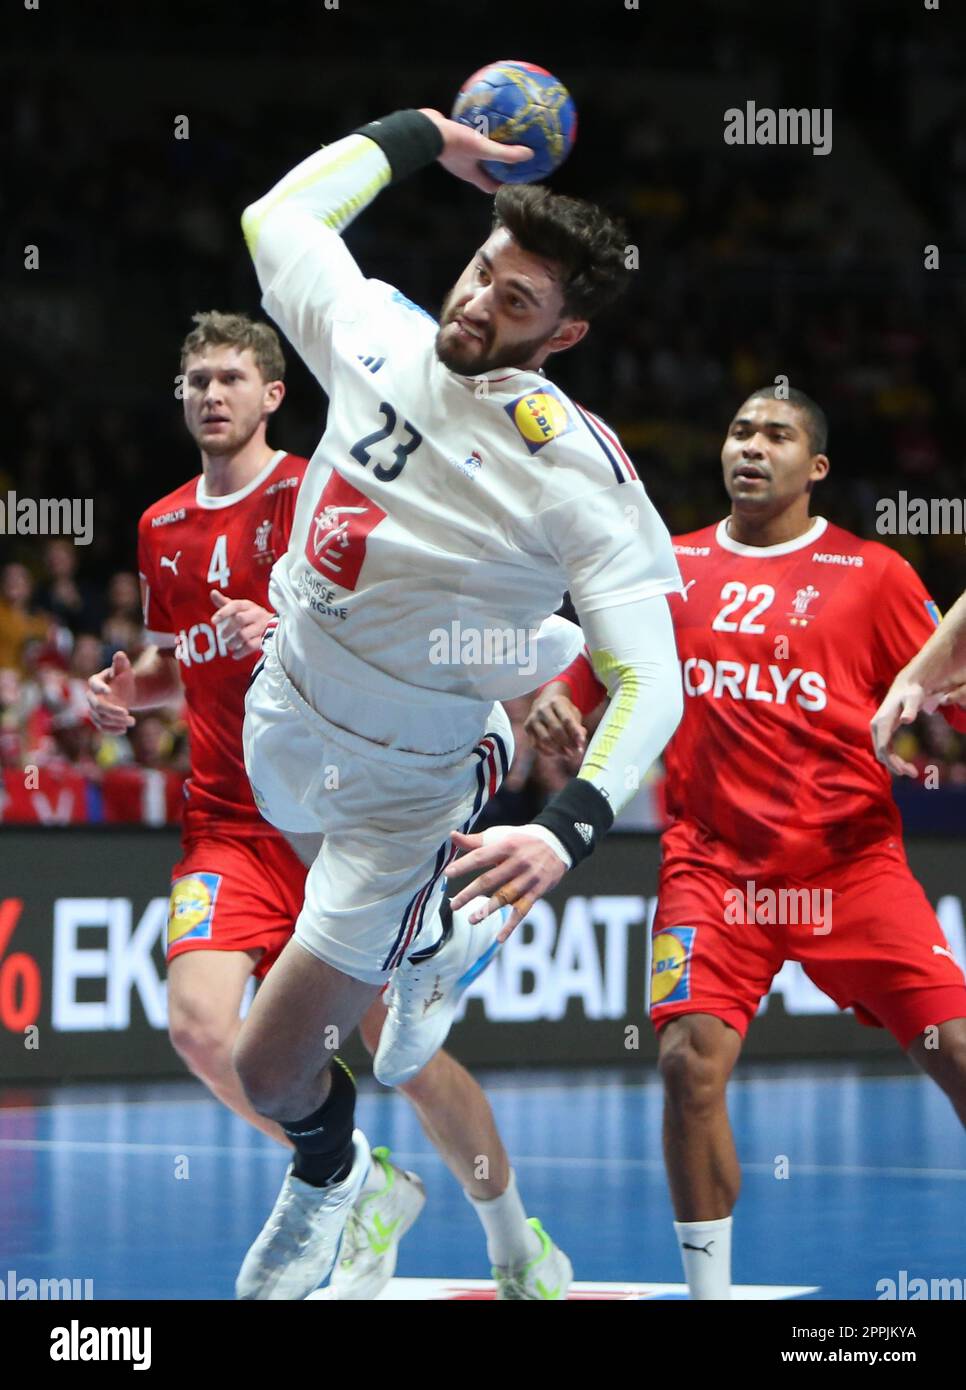 2023 IHF World Men's Handball Championship: Preview and stars to watch with  Paris 2024 berth up for grabs